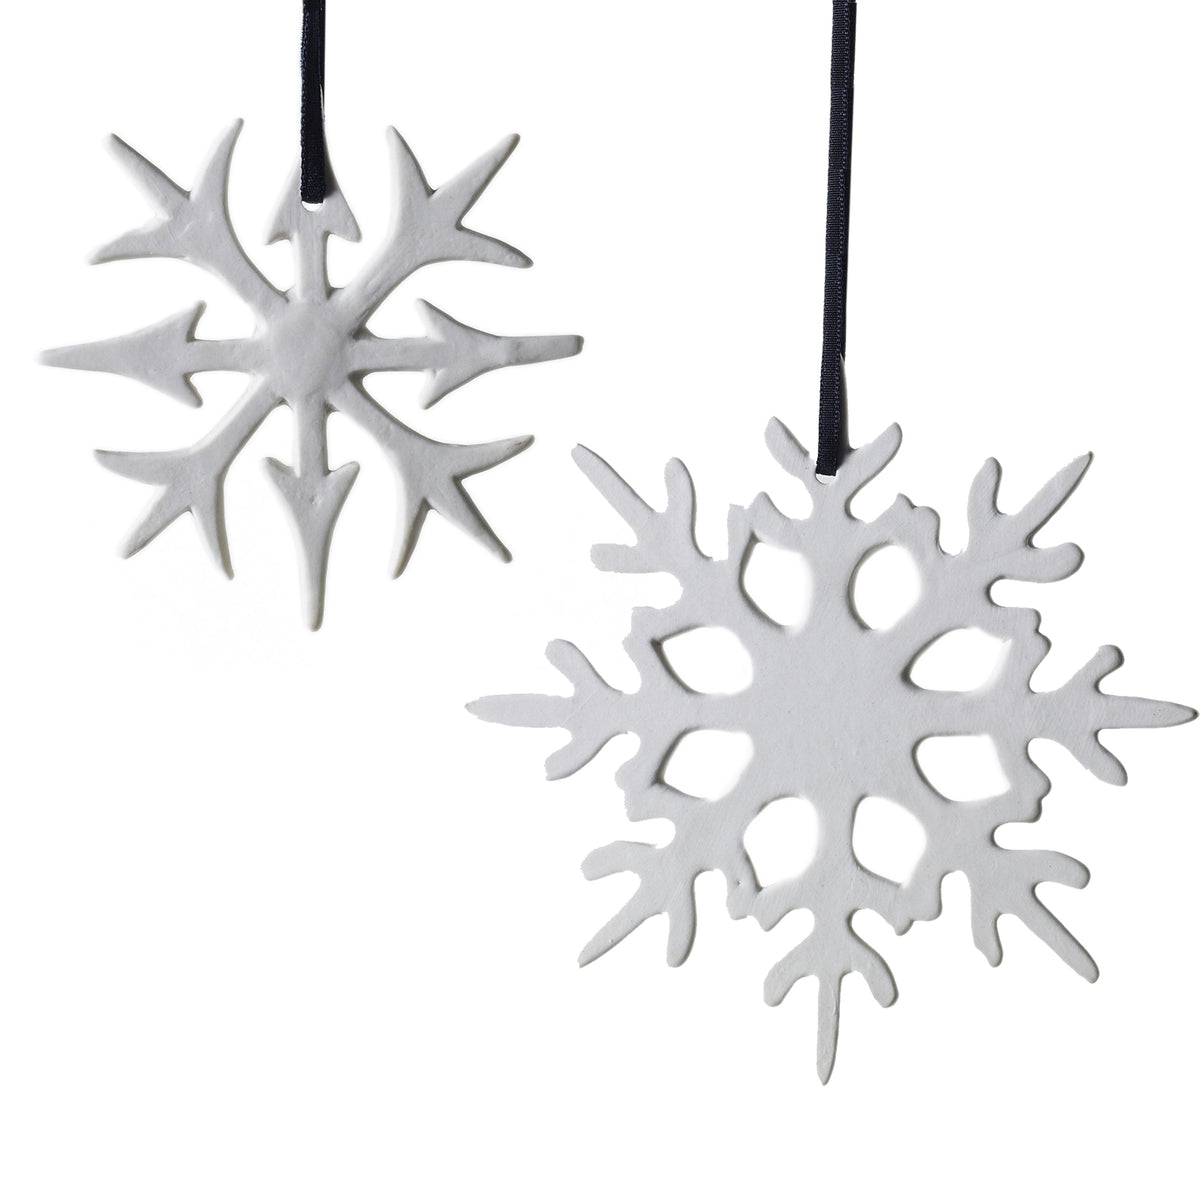  Porcelain Ceramic Snowflake Ornaments - Pack of 12 Blank Glazed  White Ceramic Snowflake Ornaments Ready to Decorate Paint and Personalize  by Factory Direct Craft : Arts, Crafts & Sewing